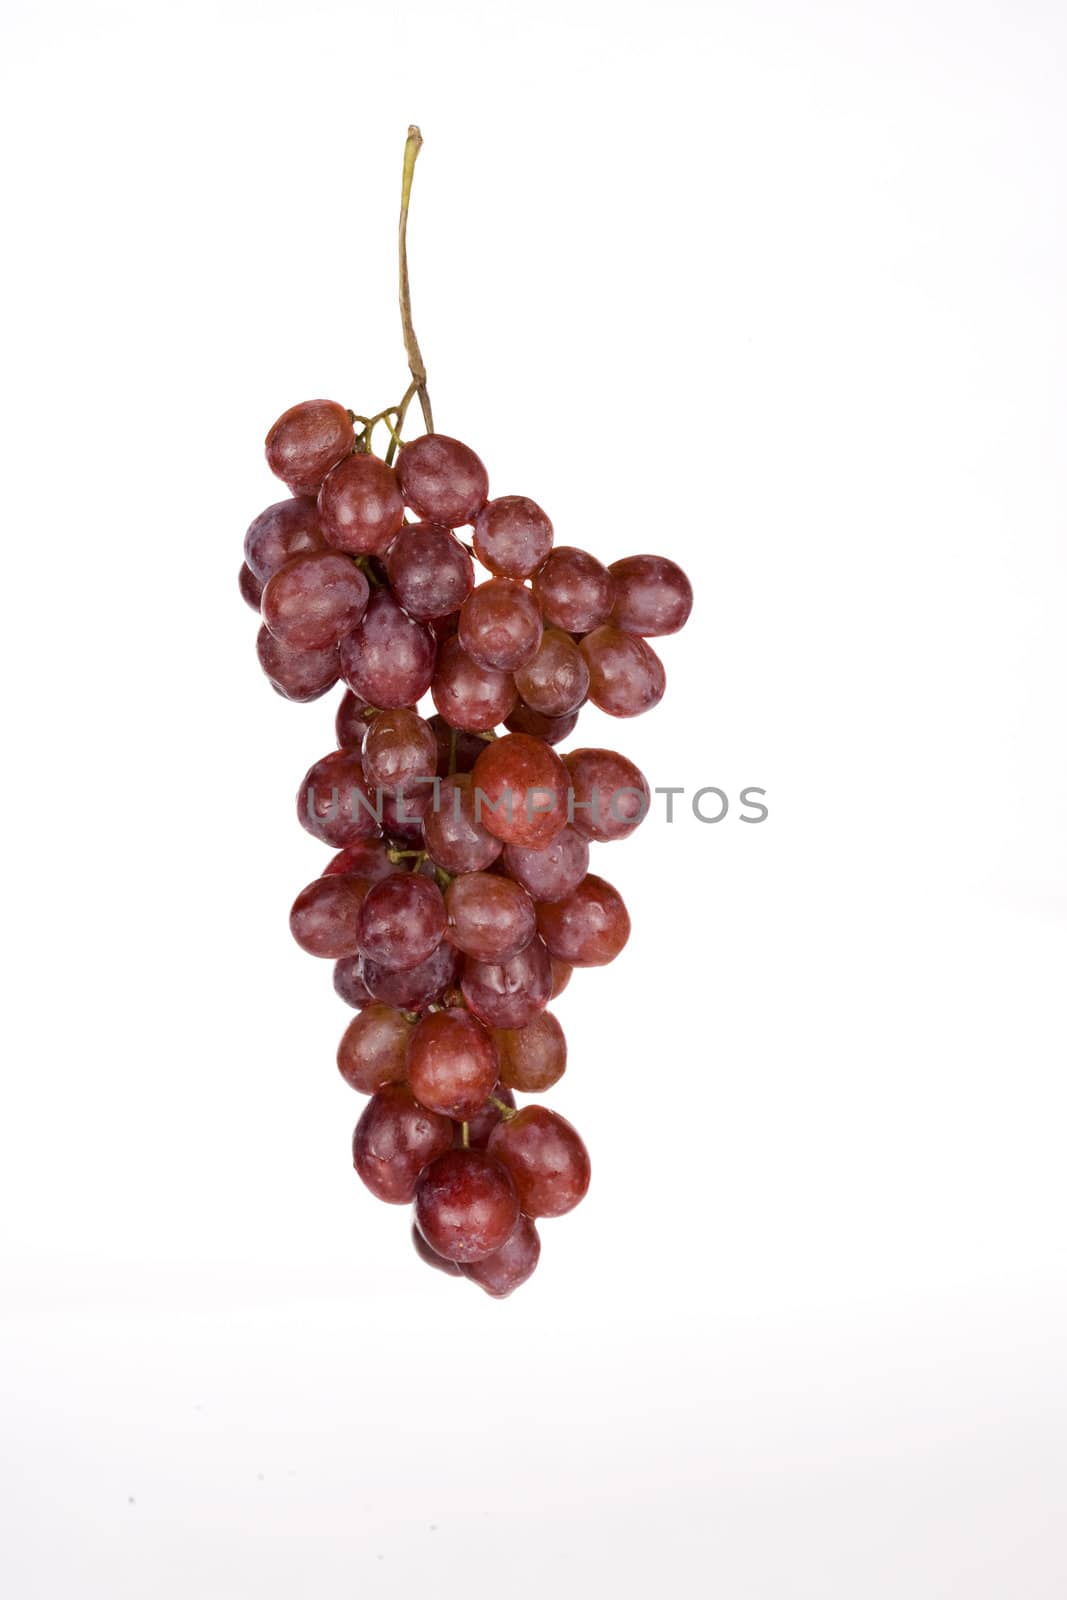 Bunch of red grapes isolated on white